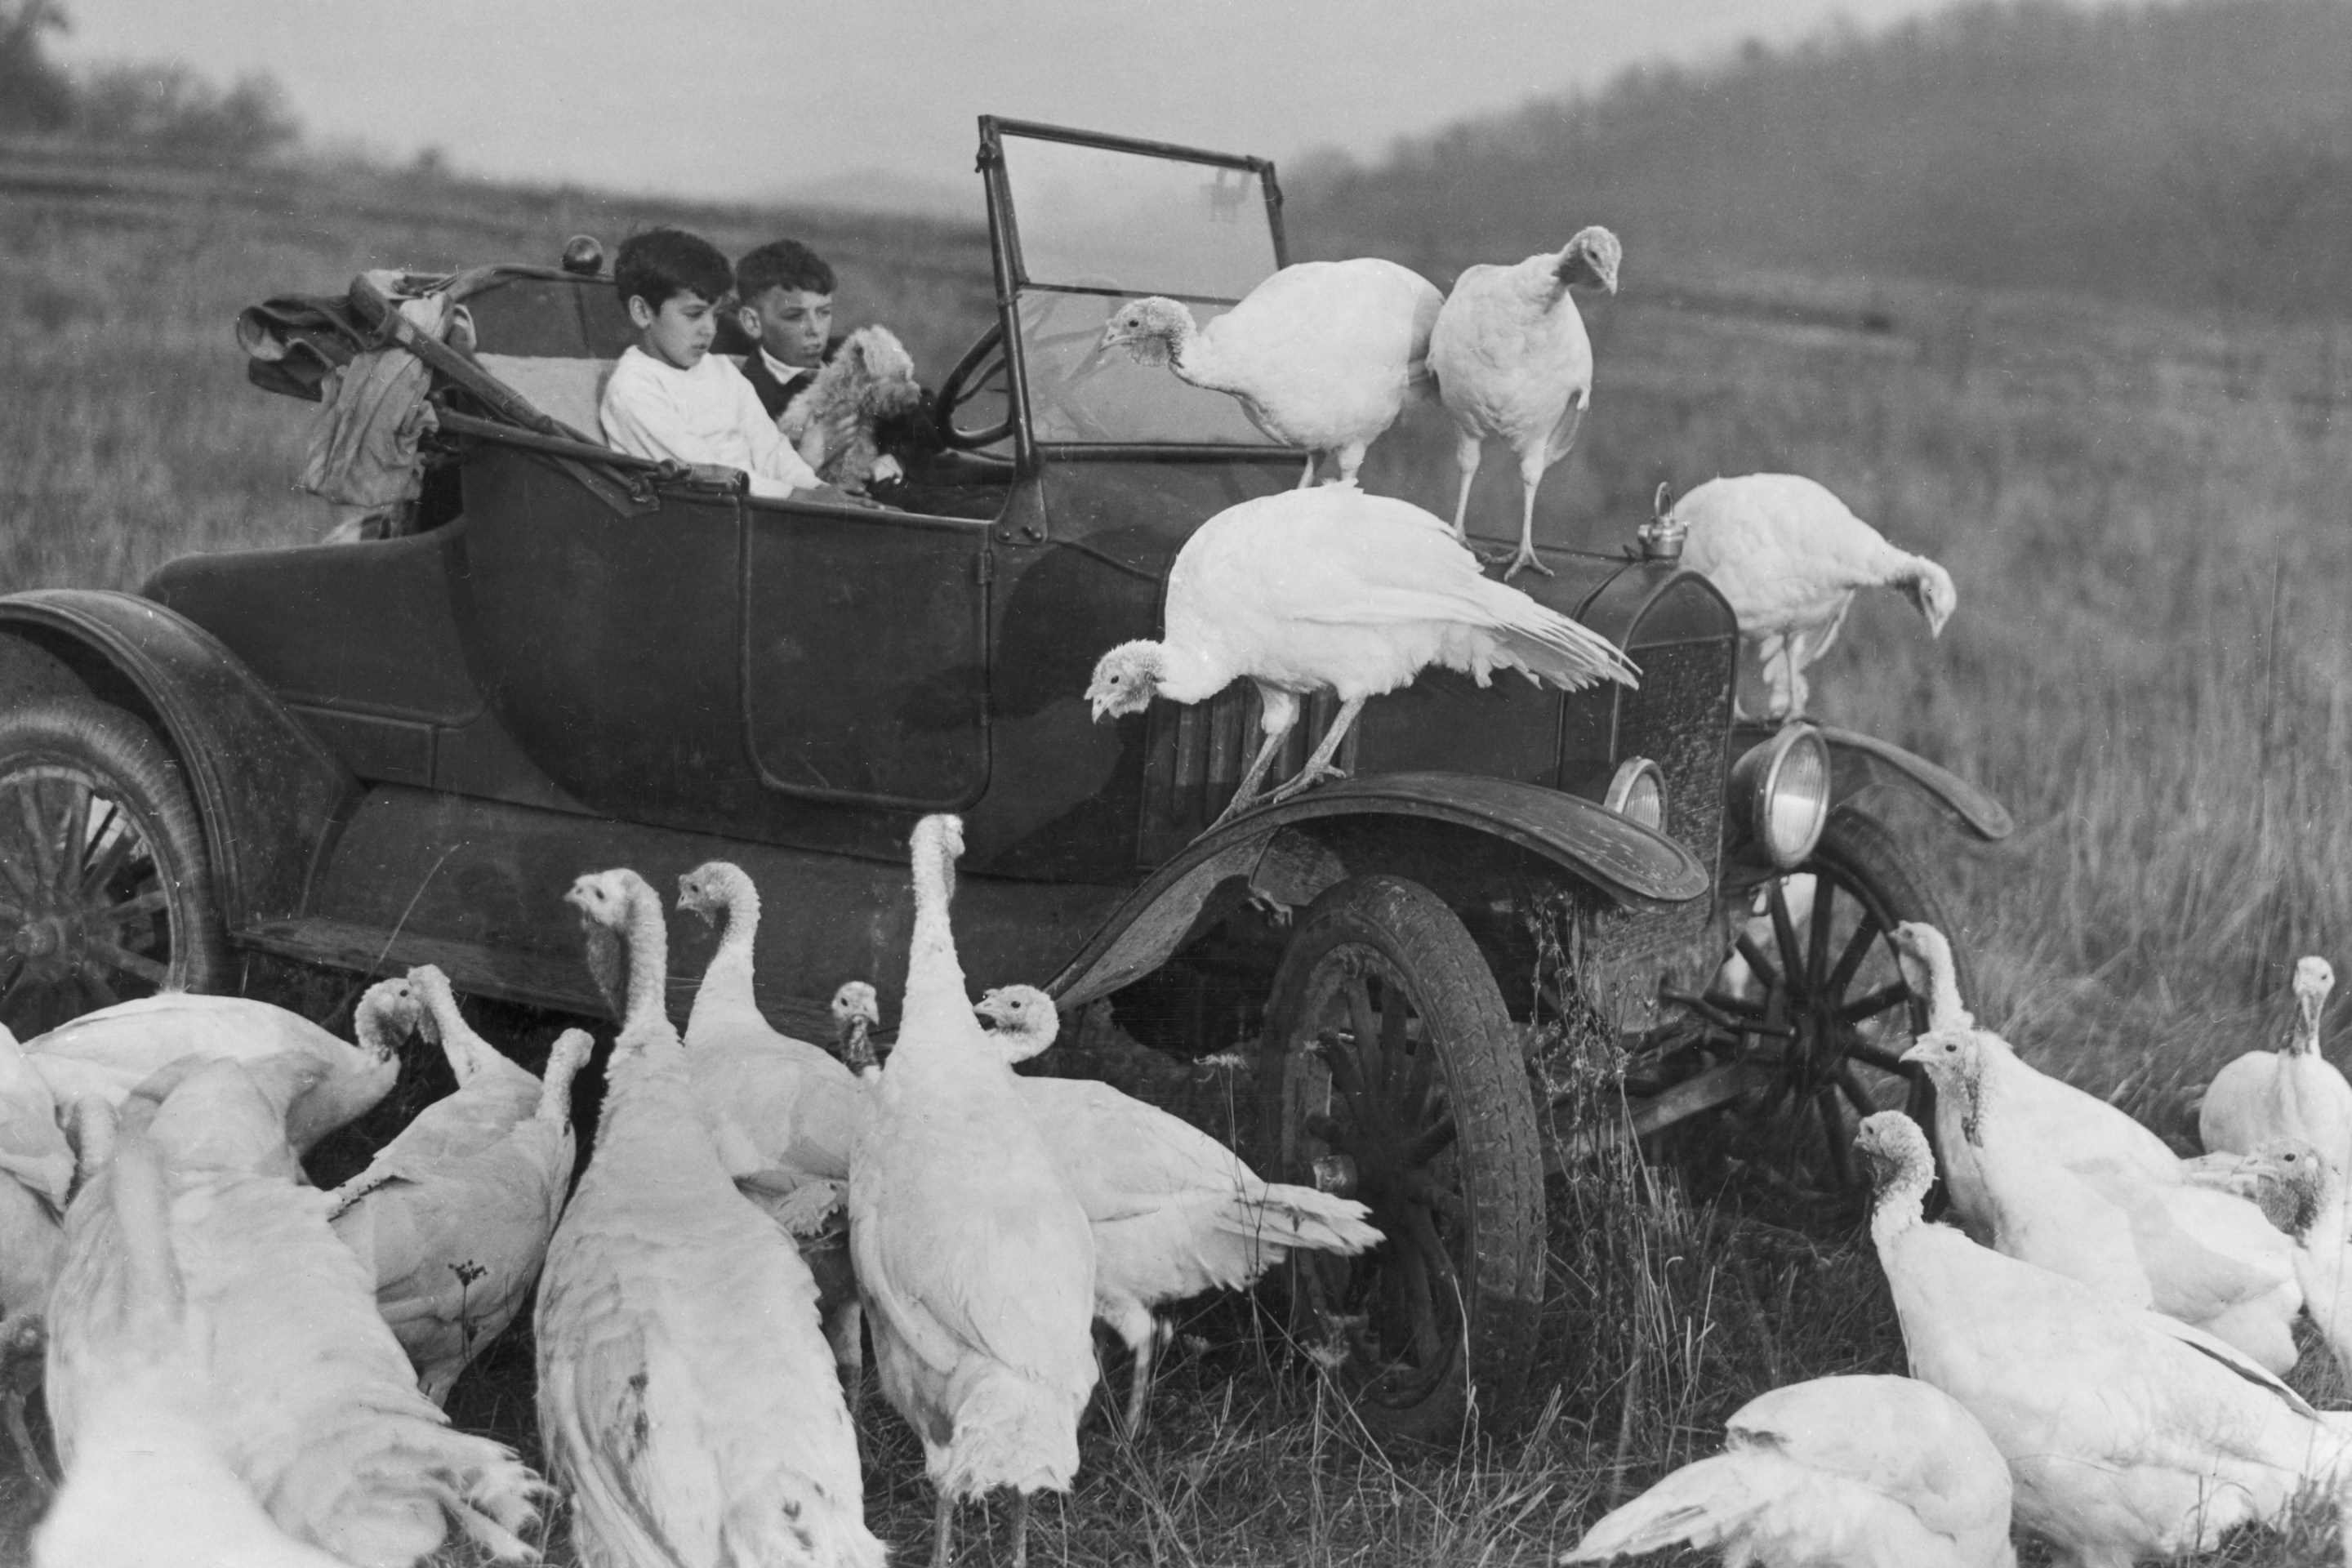 Boys in a car surrounded by turkeys.